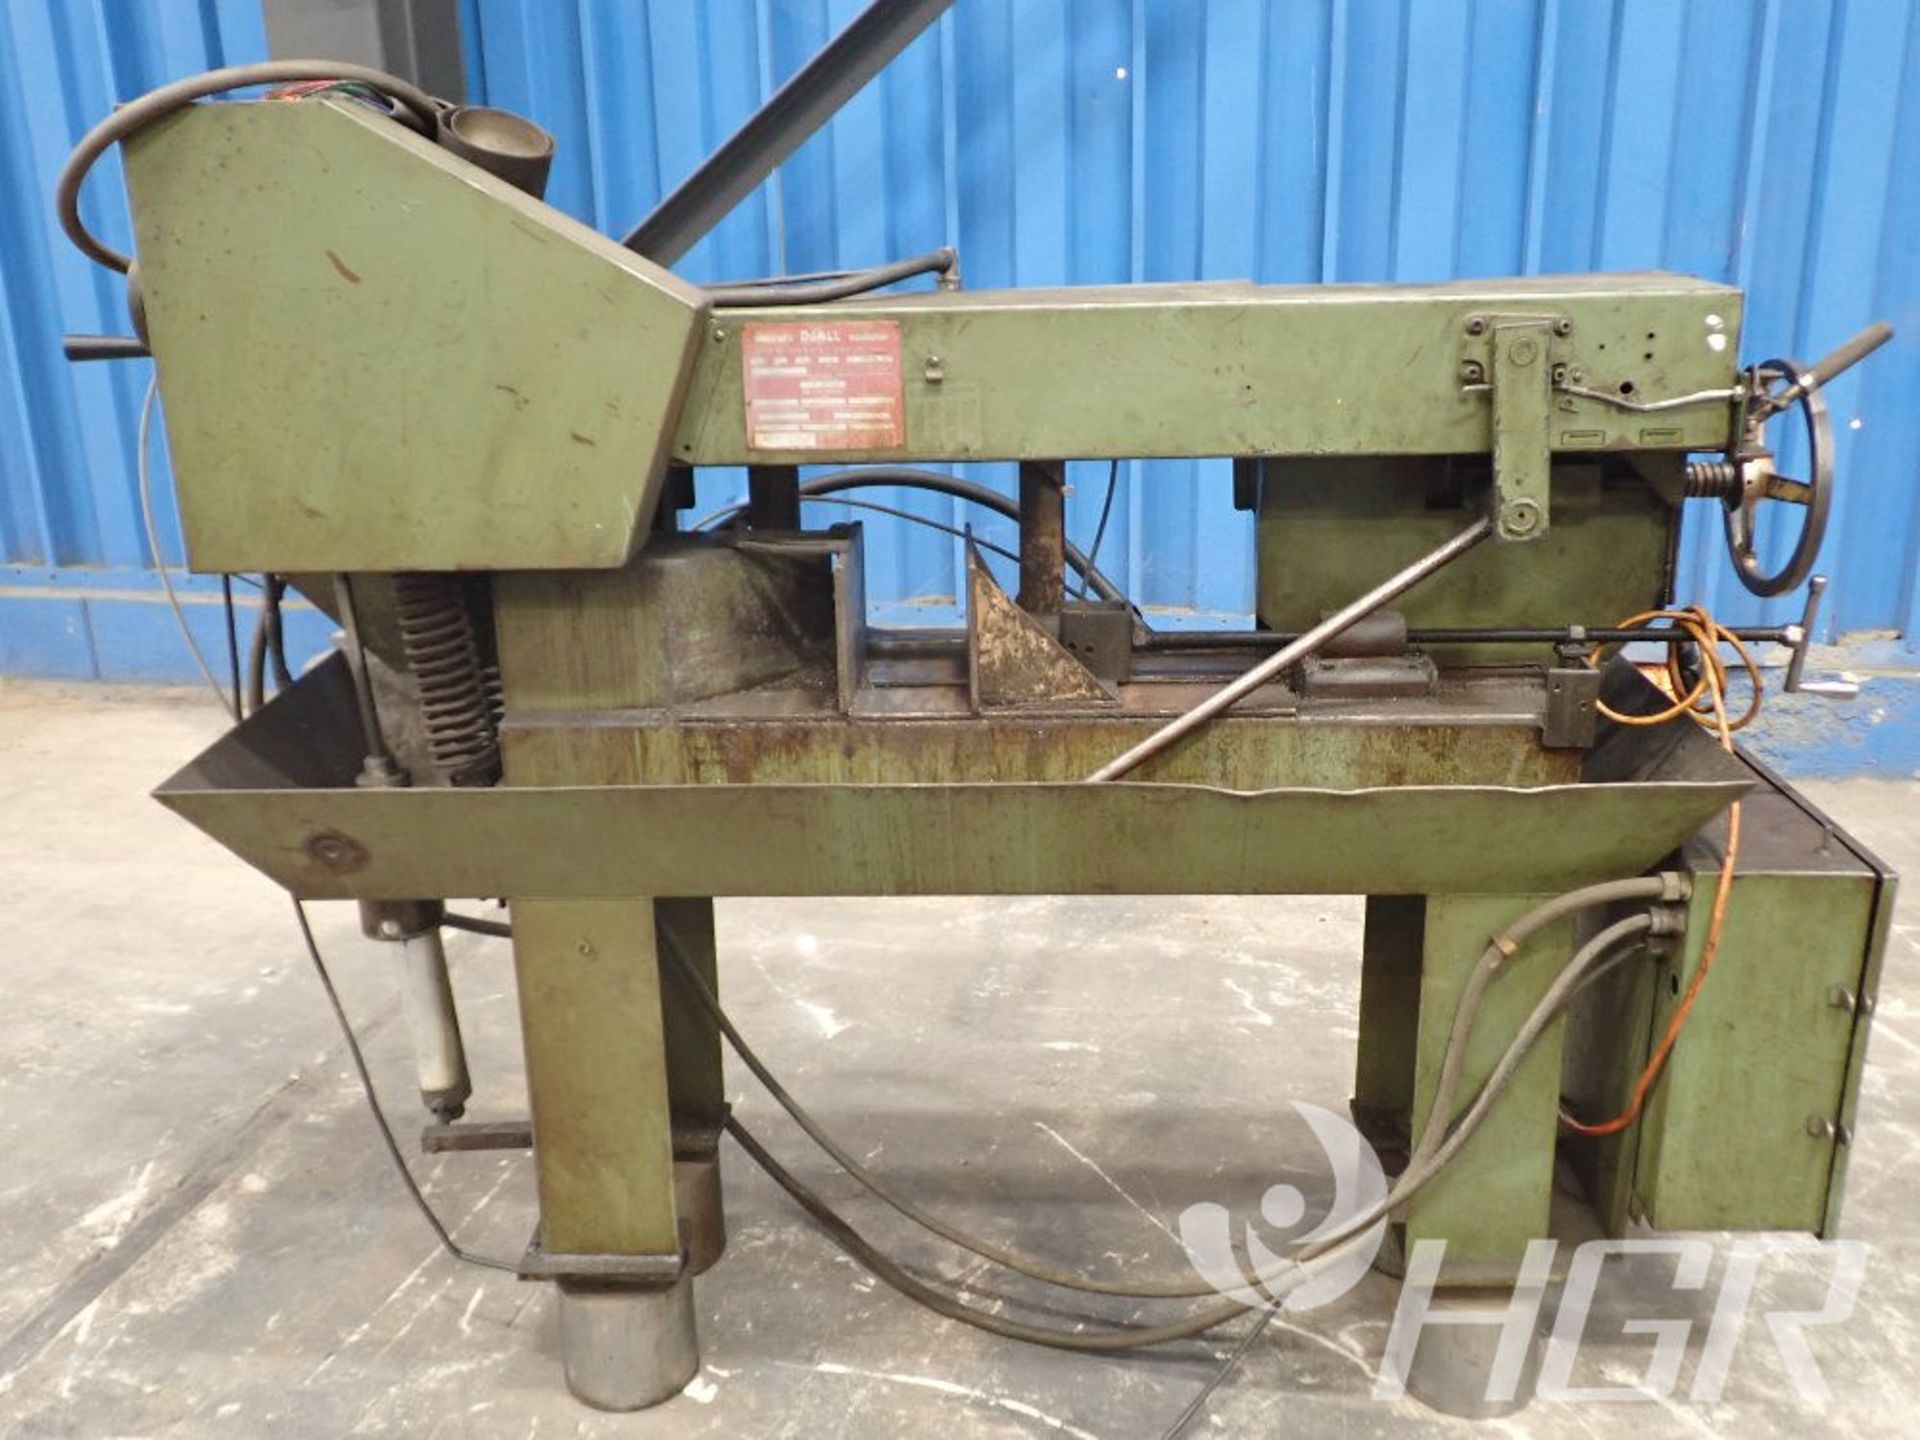 DO ALL HORIZONTAL BANDSAW, Model C-4, Date: n/a; s/n 234-773309, Approx. Capacity: 18", Power: 3/ - Image 2 of 19